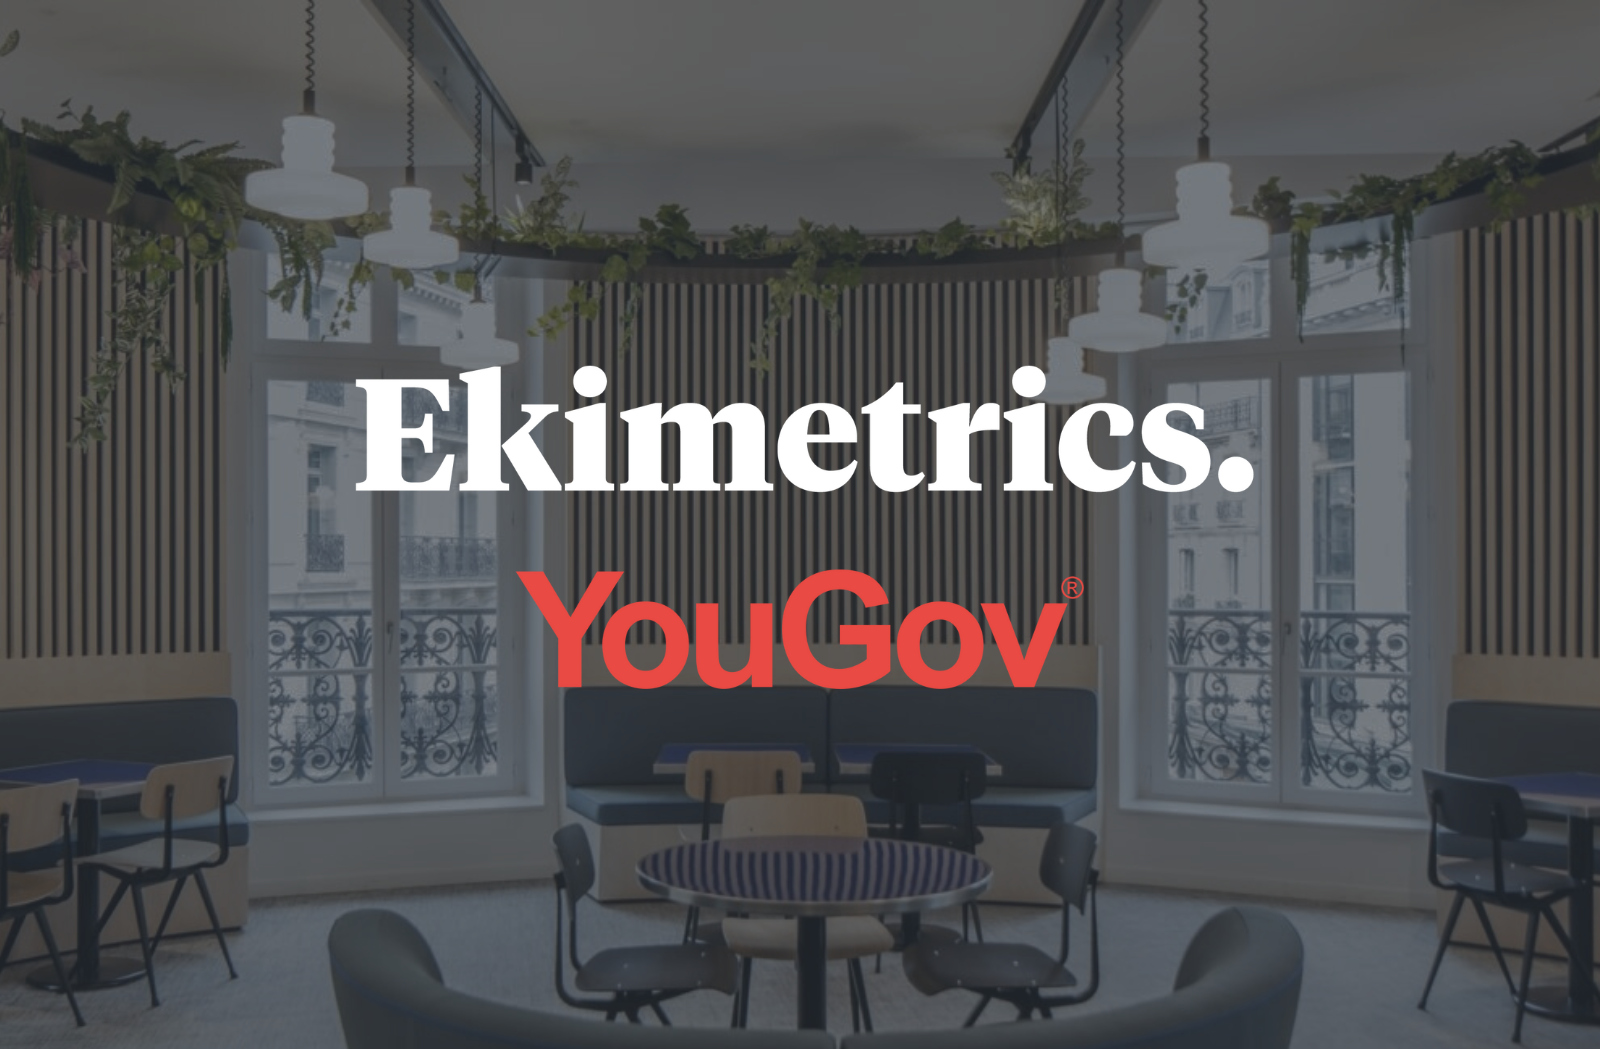 Ekimetrics and YouGov join forces to integrate YouGov data into companies’ brand image analyses